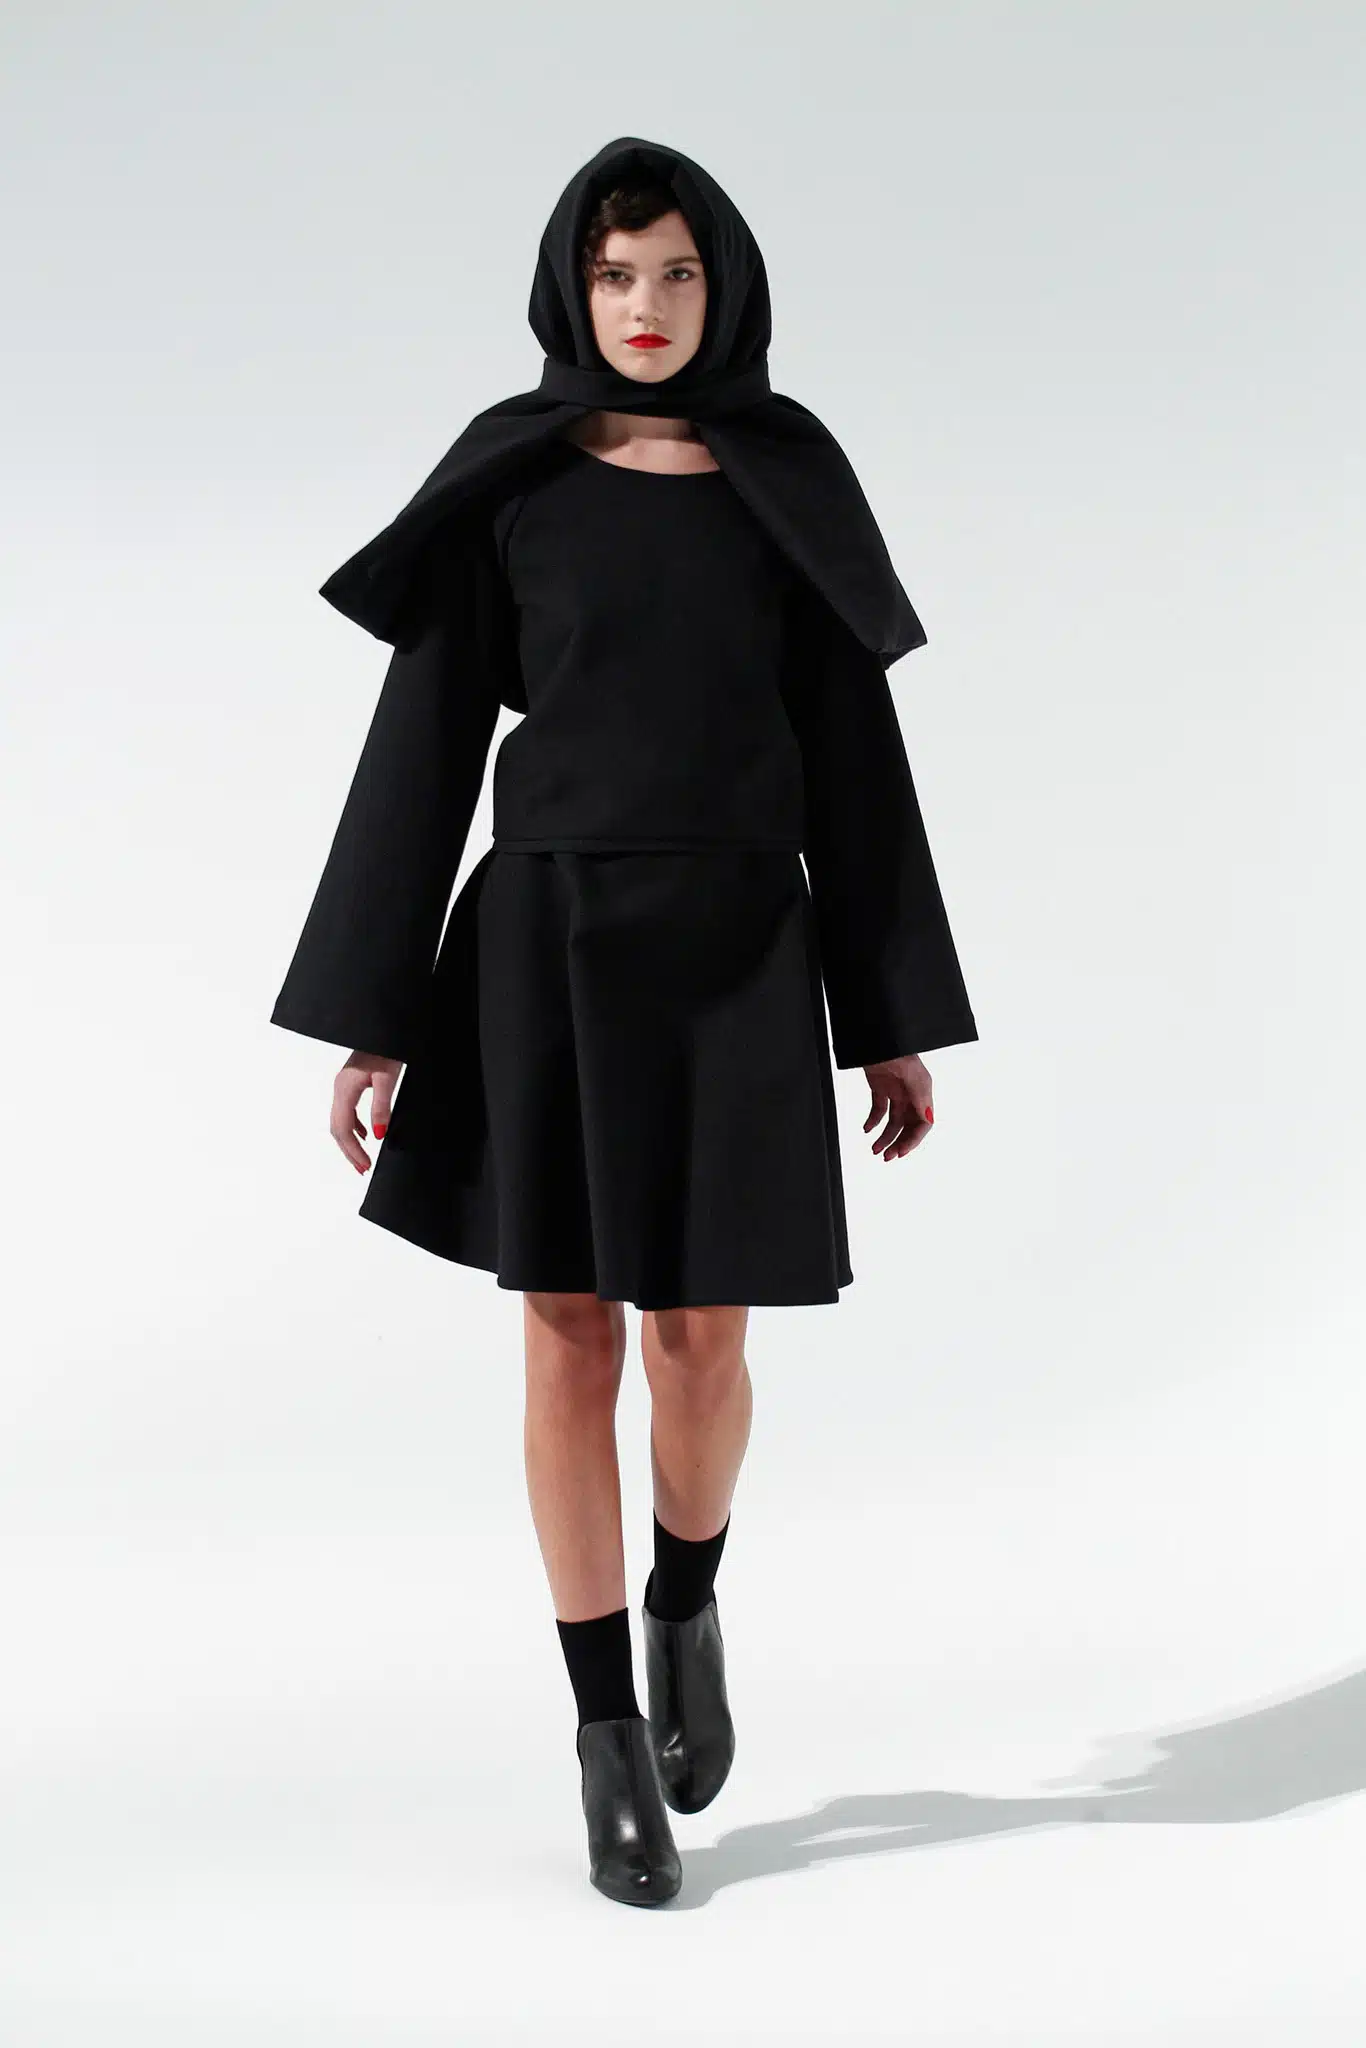 Image from FW15 SHOW Collection